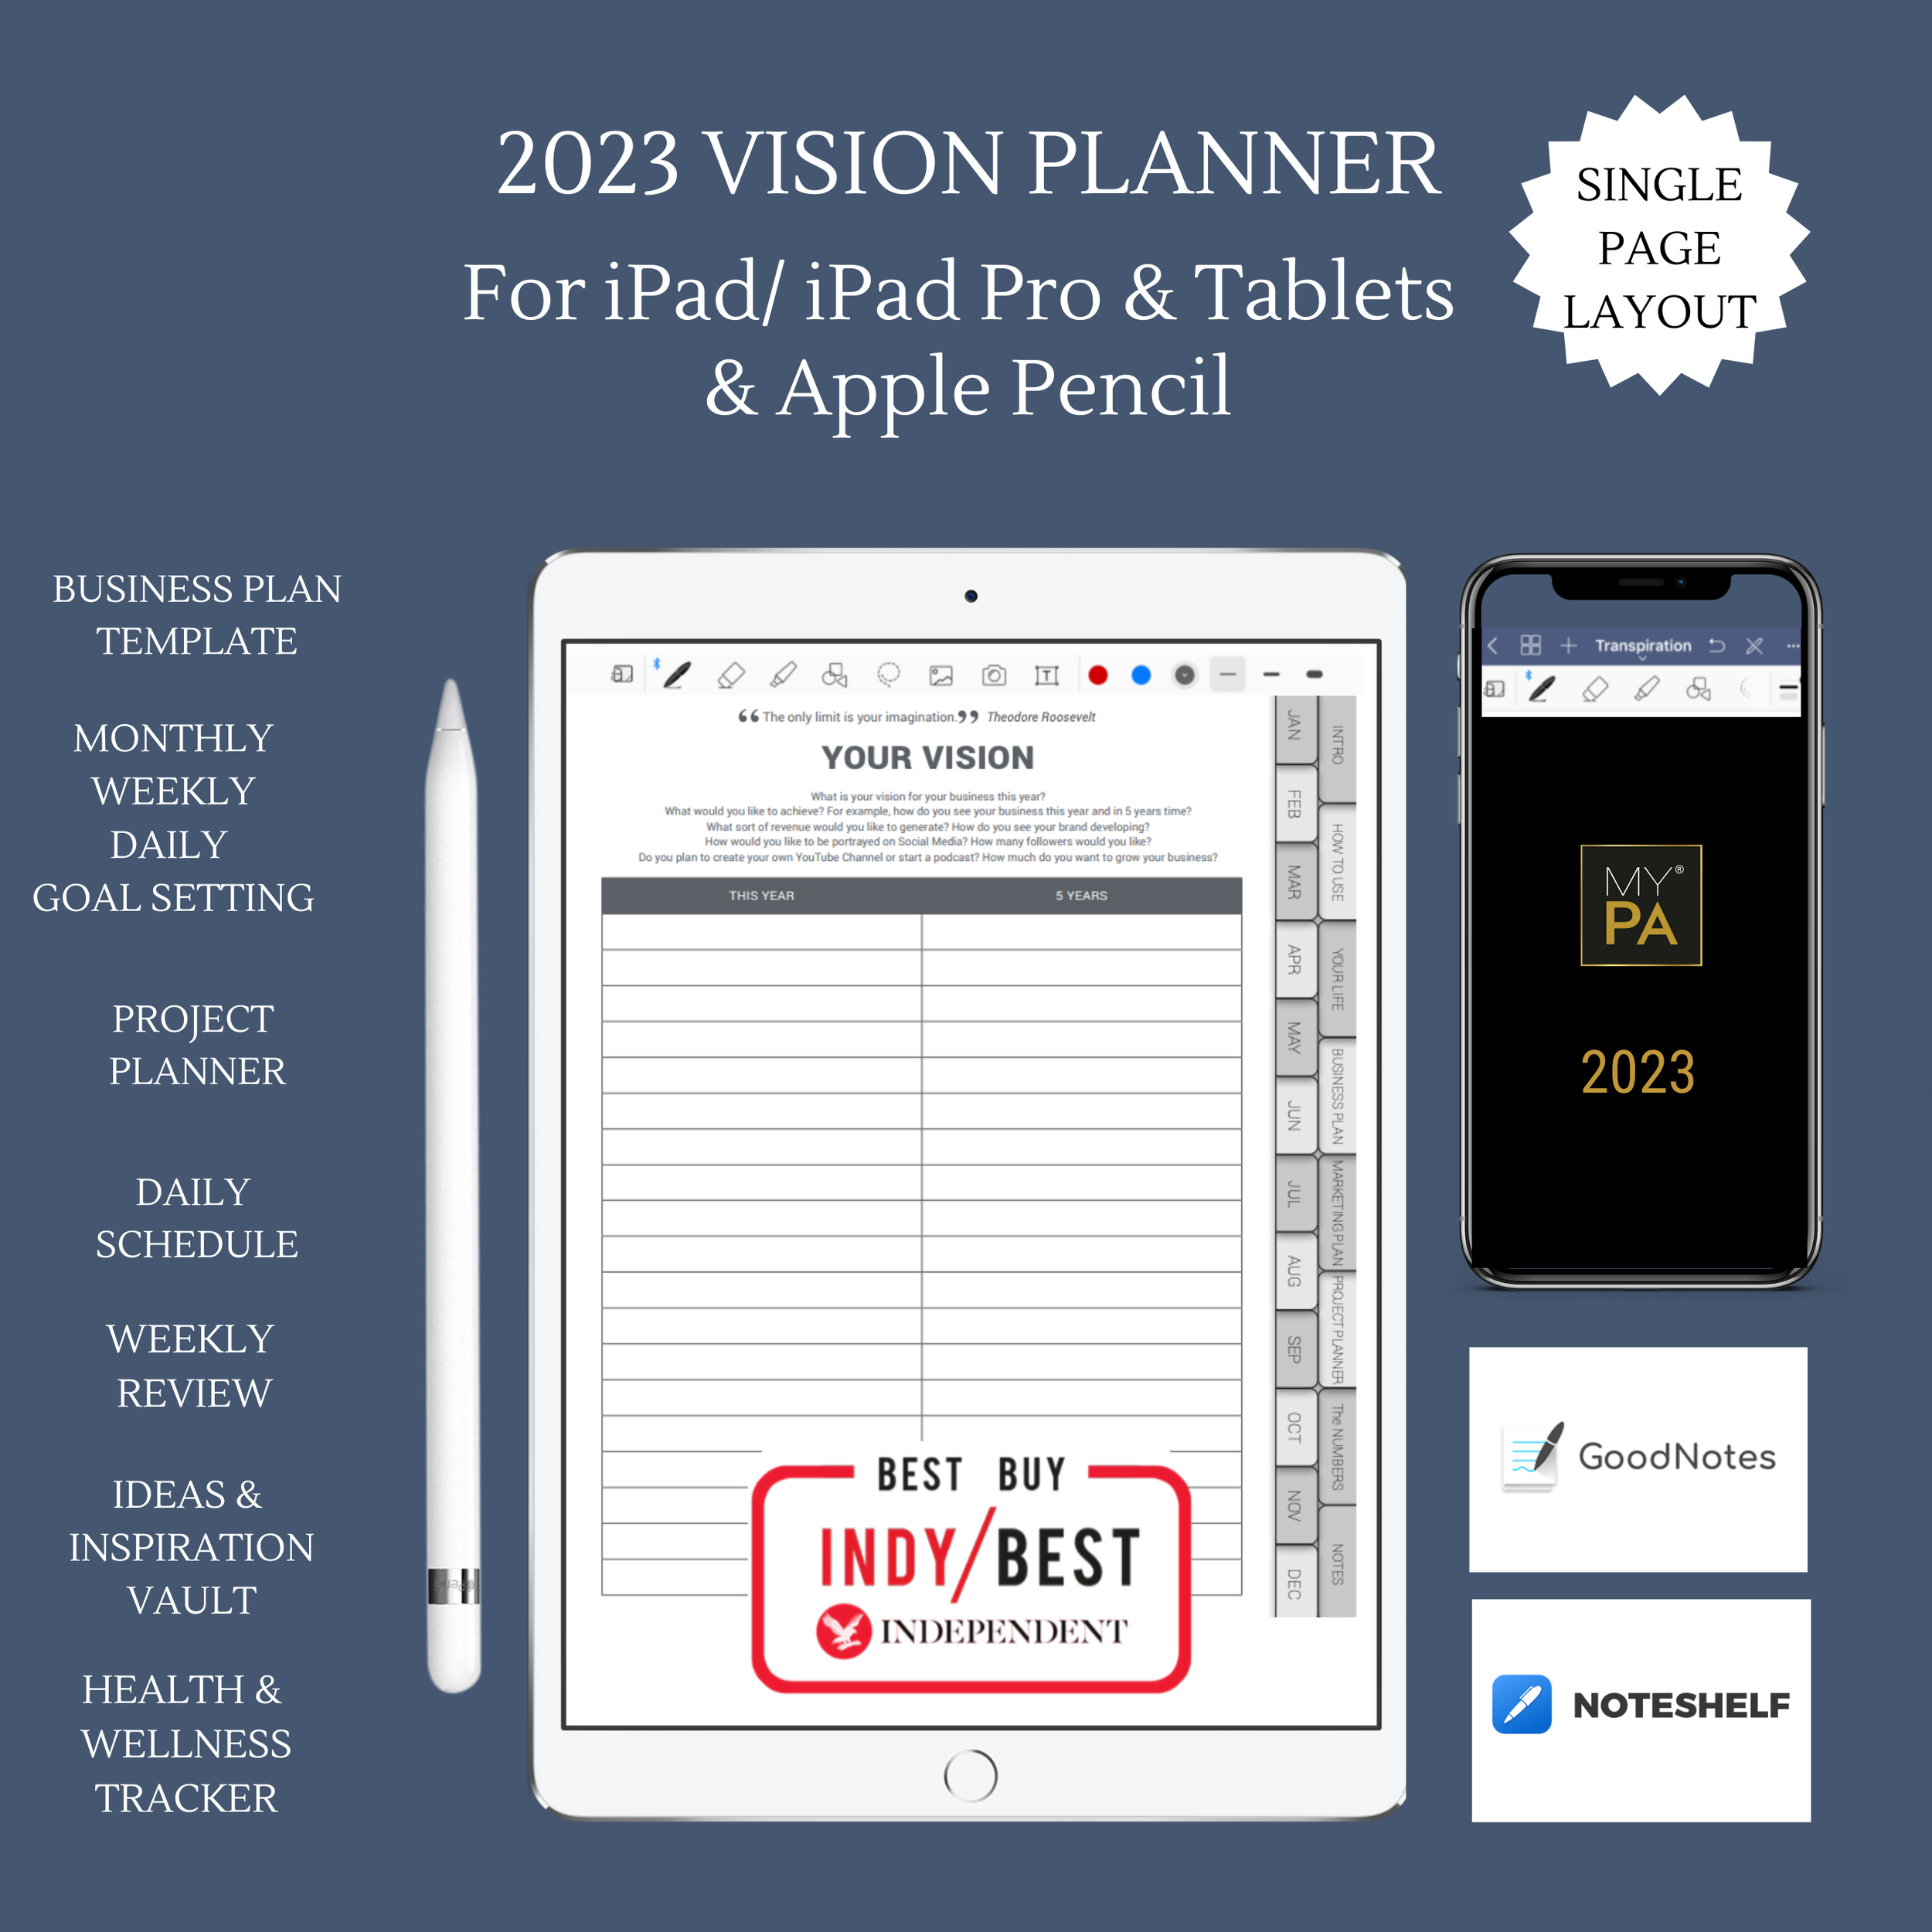 2023 Digital PRODUCTIVITY Planner for iPad and iPad Pro & Tablets